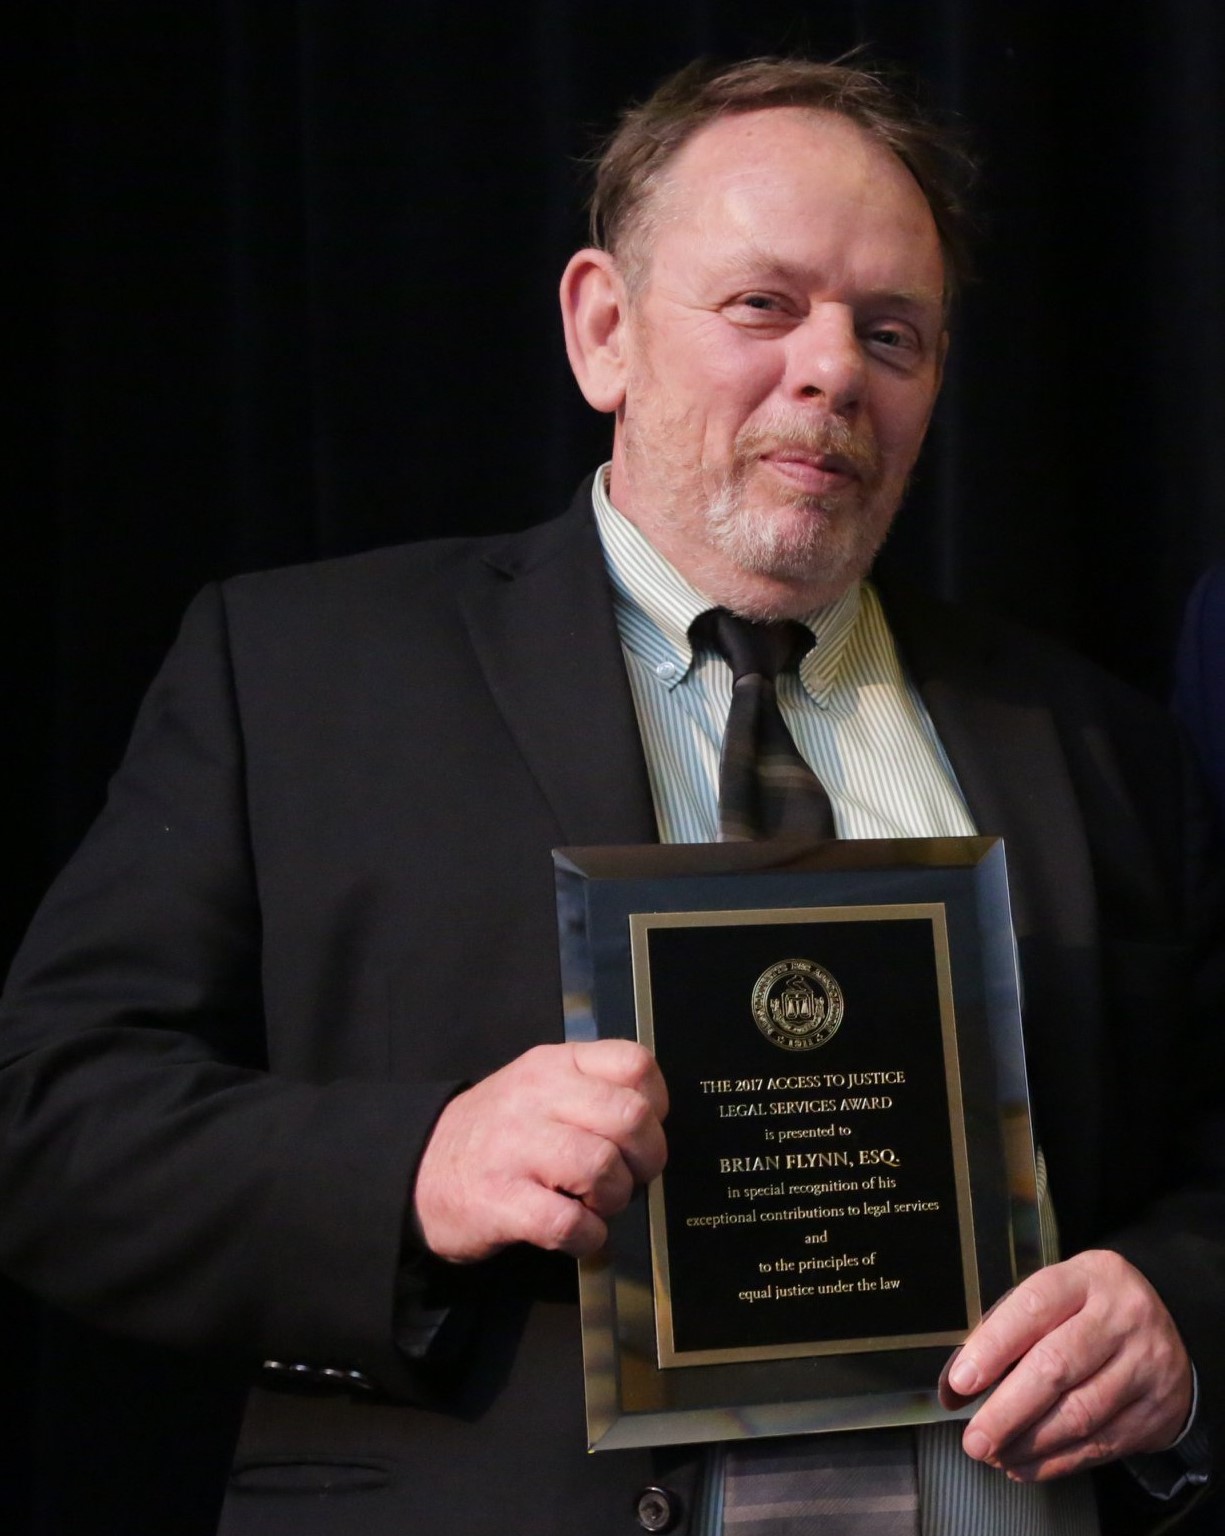 Brian accepts an award from the Mass Bar Foundation. He is standing on stage holding an award plaque and wearing a dark suit.